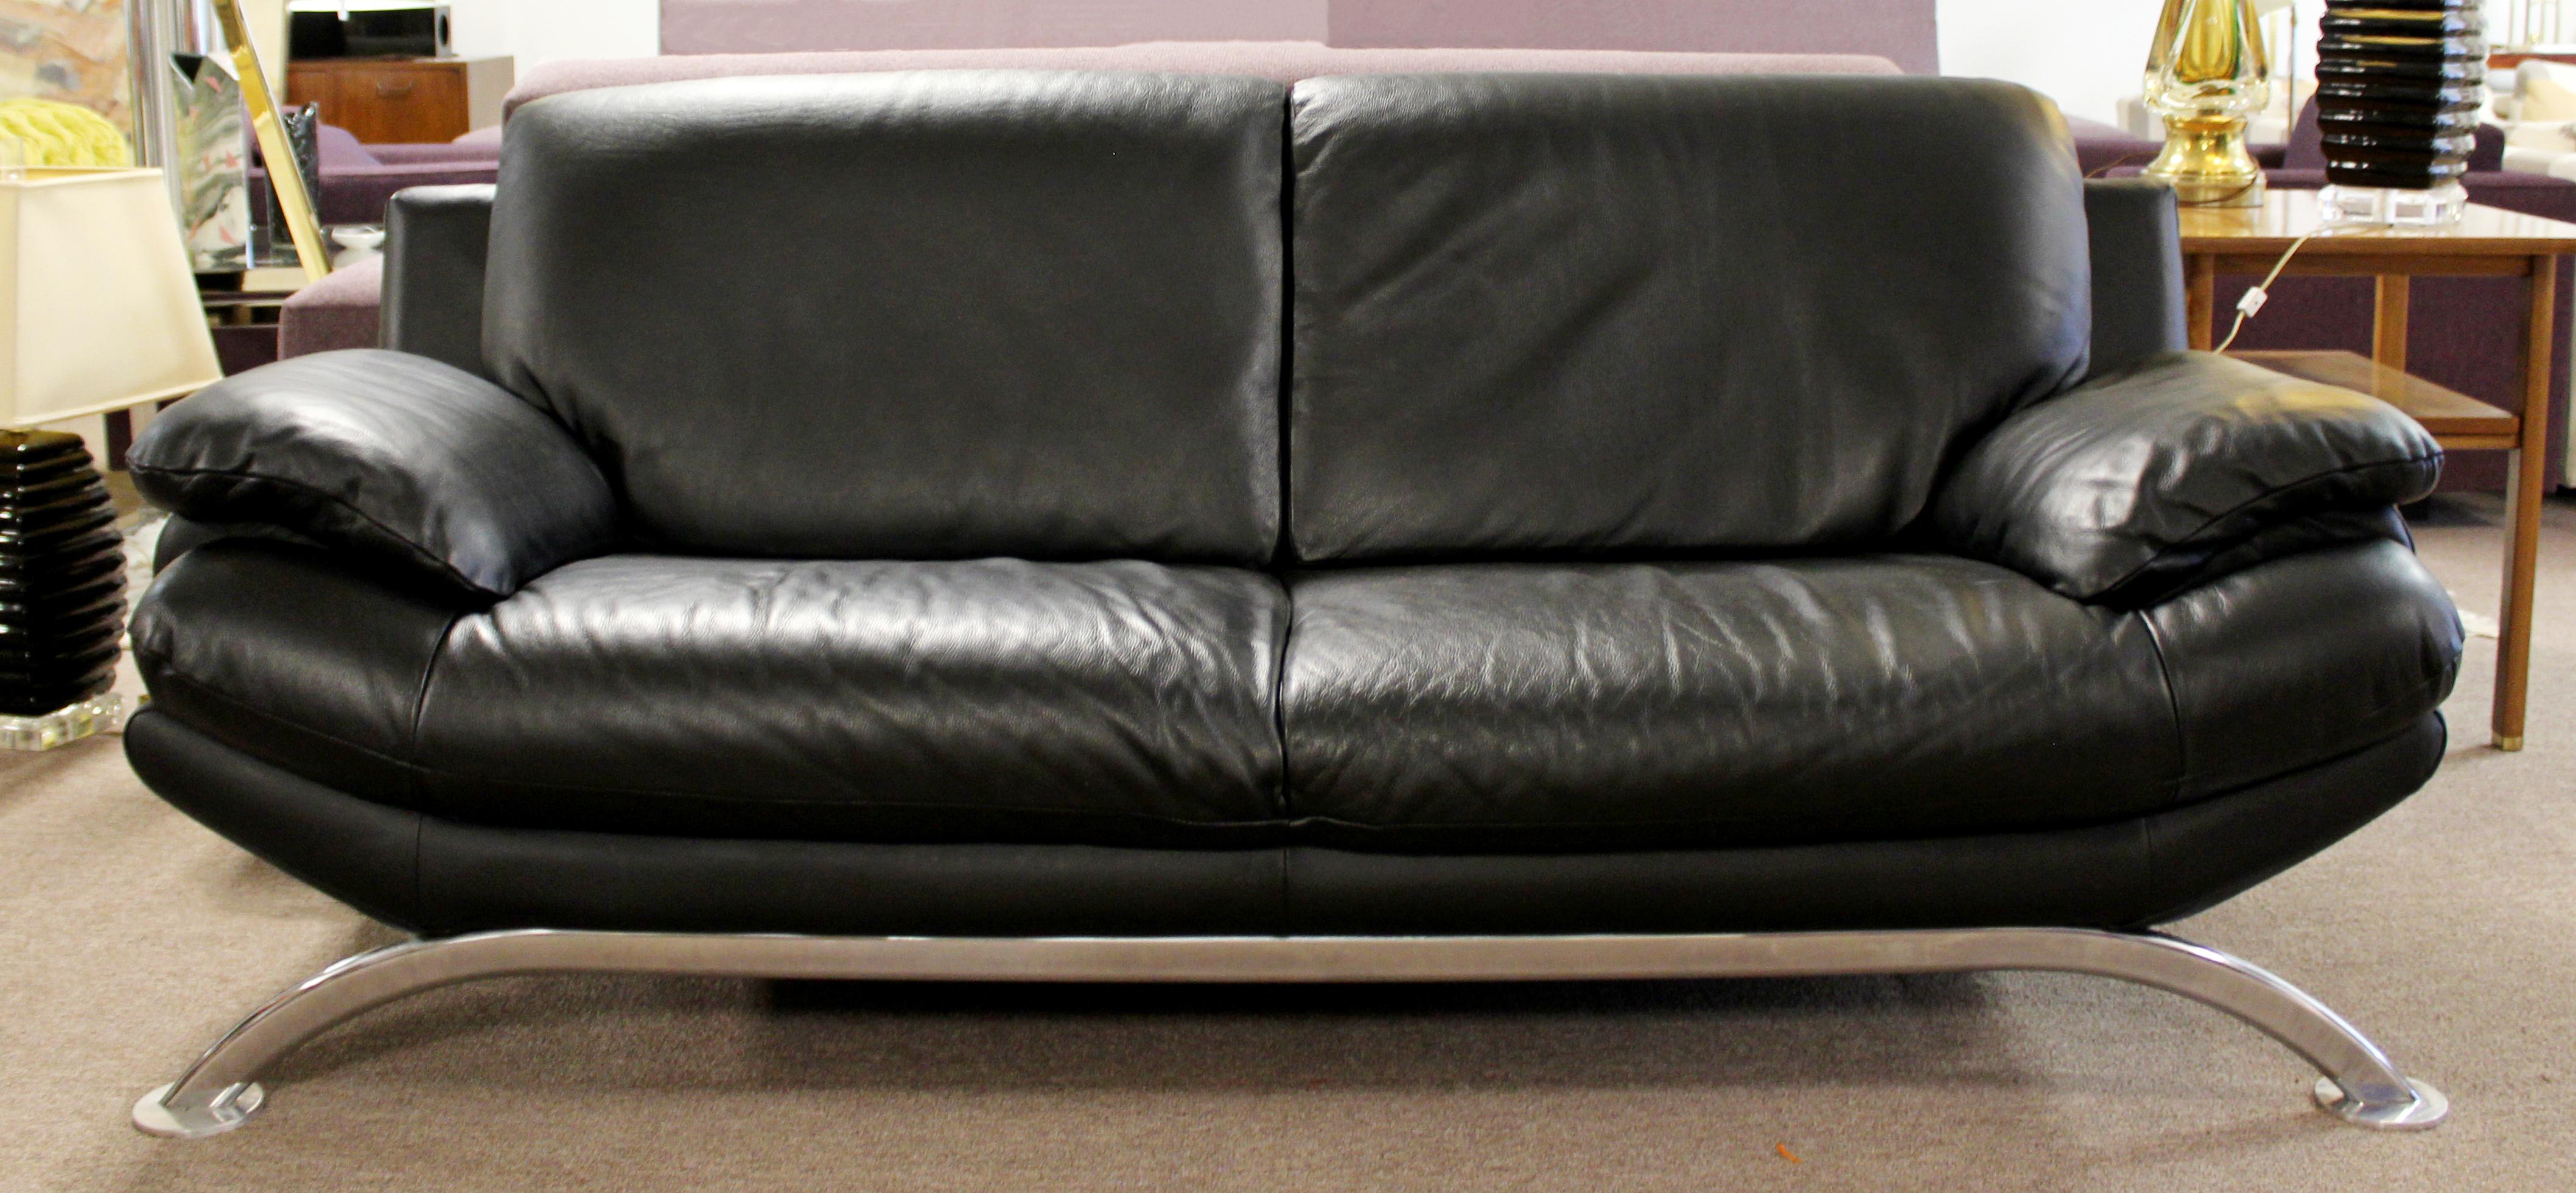 For your consideration is an exceptional, architectural sofa, made of chrome and with black leather upholstery by Roche Bobois, 1980s. In very good vintage condition. The dimensions are 79